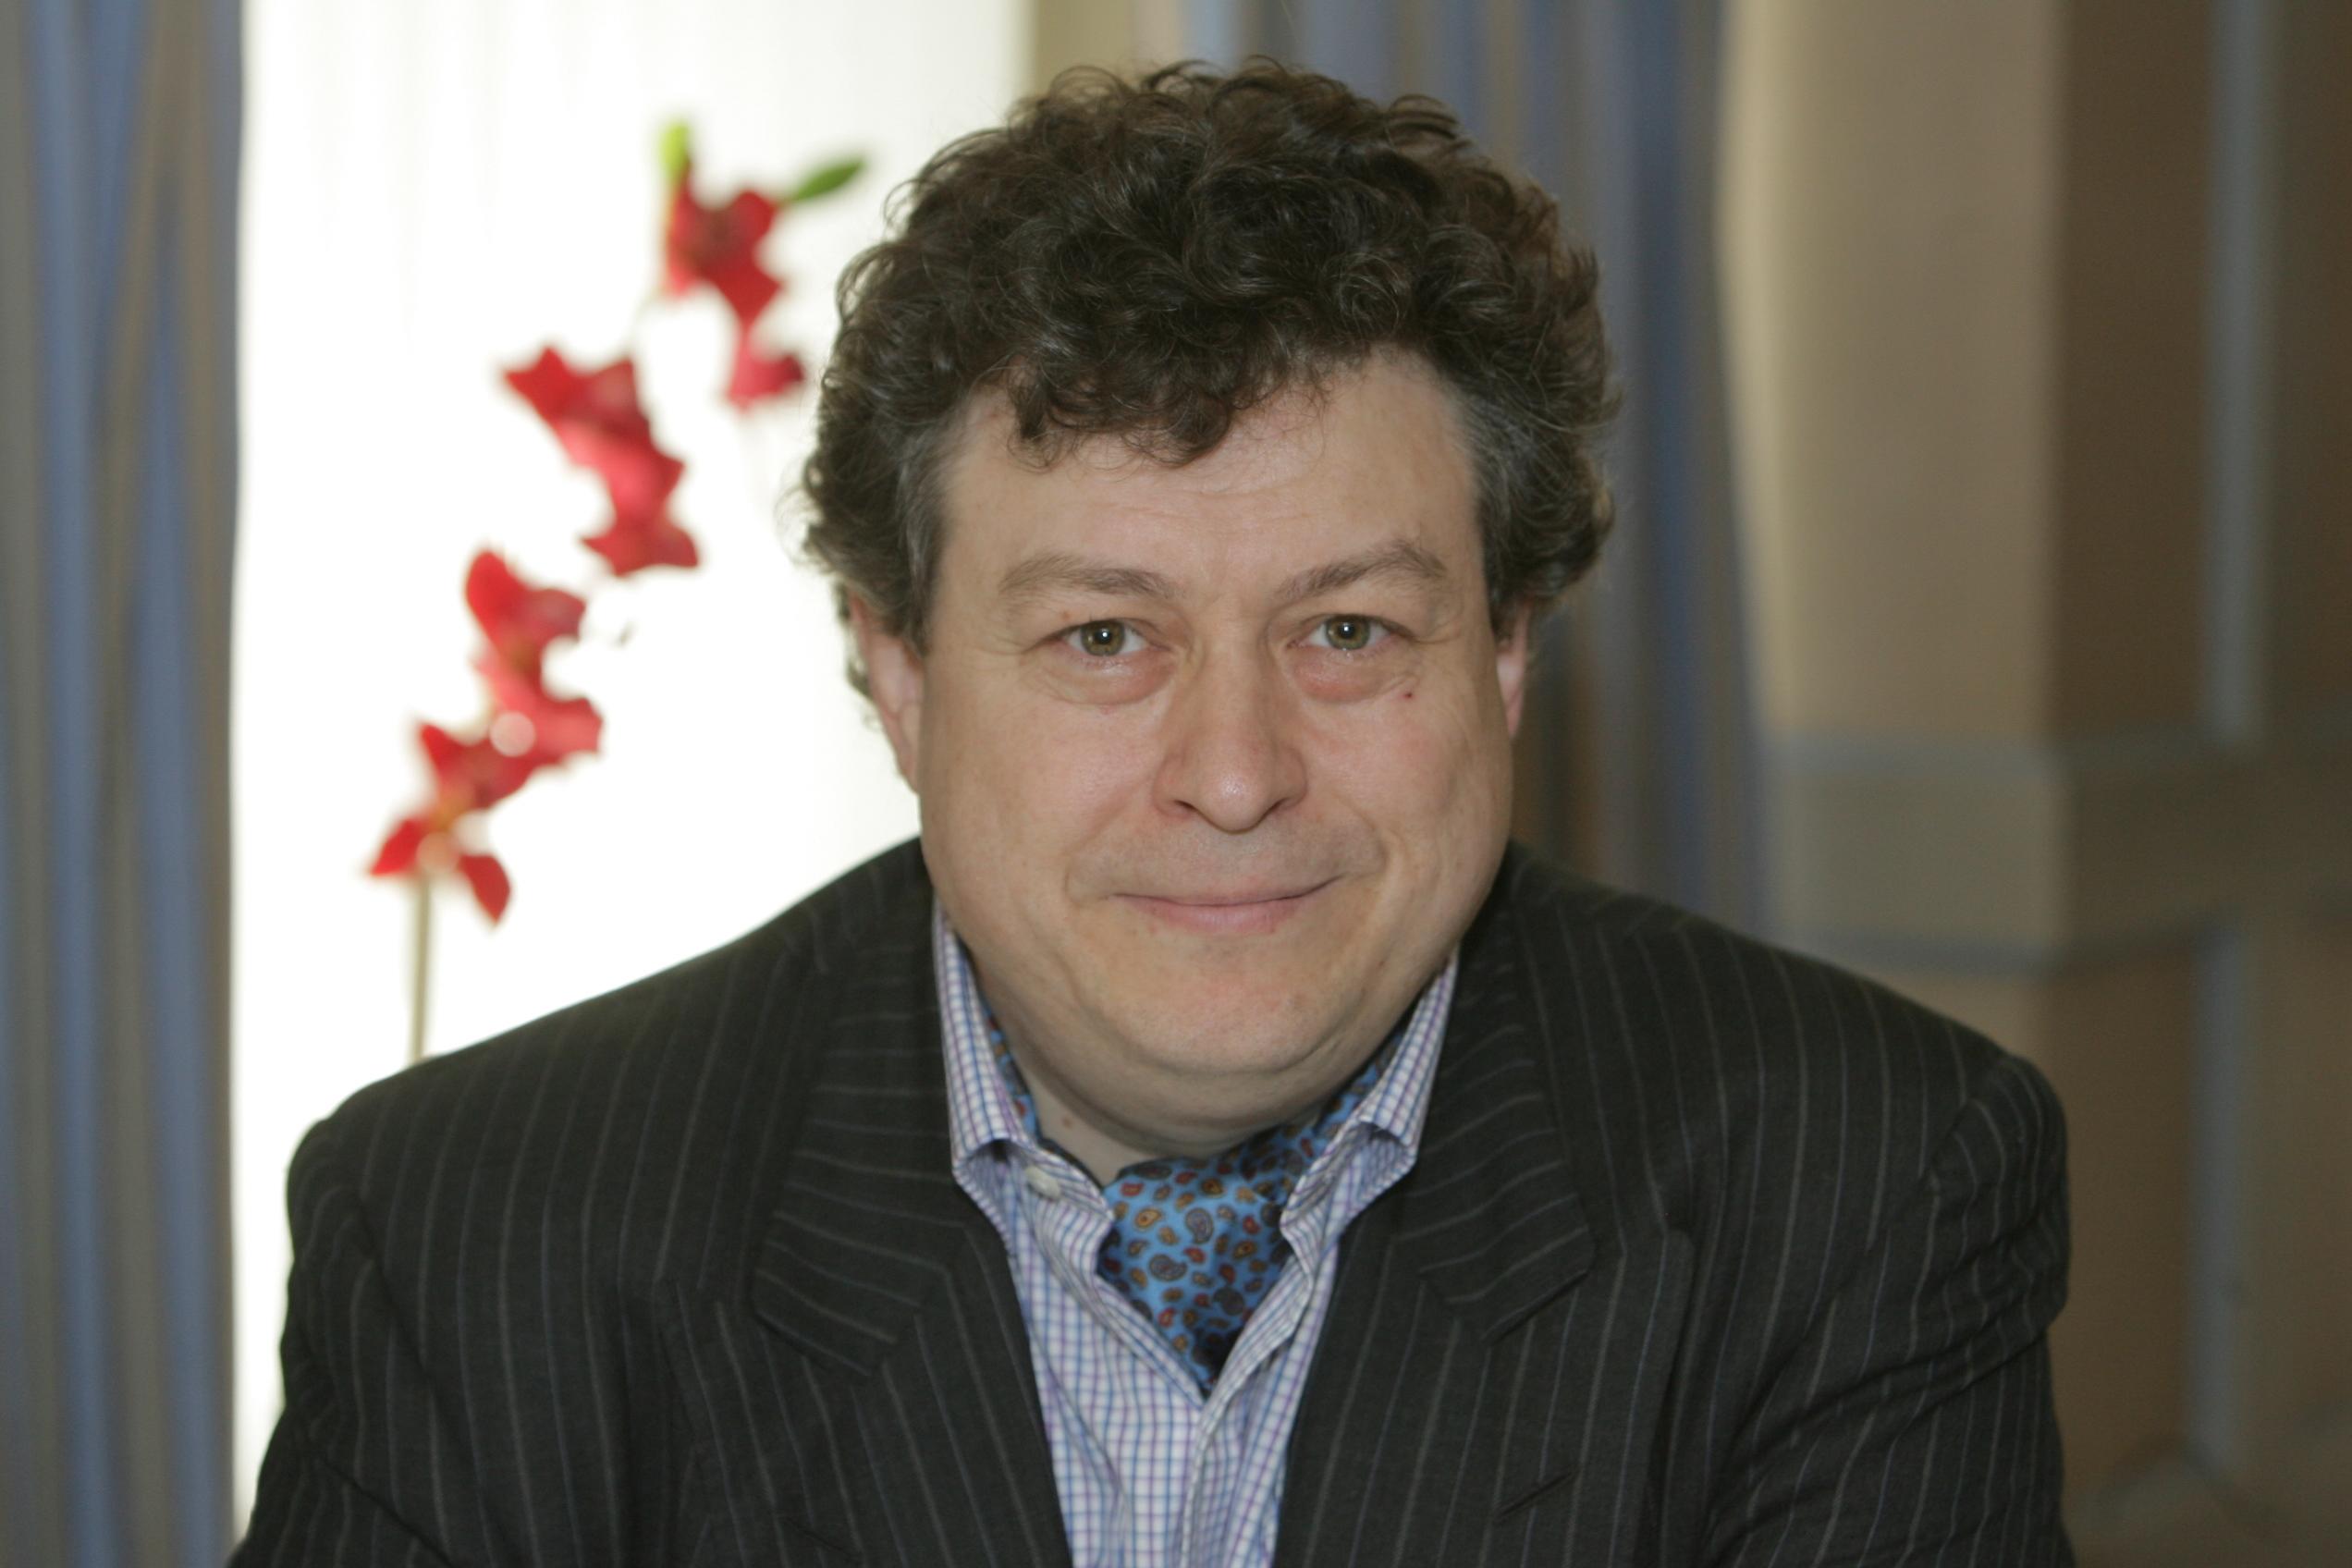 Res_4003825_RorySutherland2